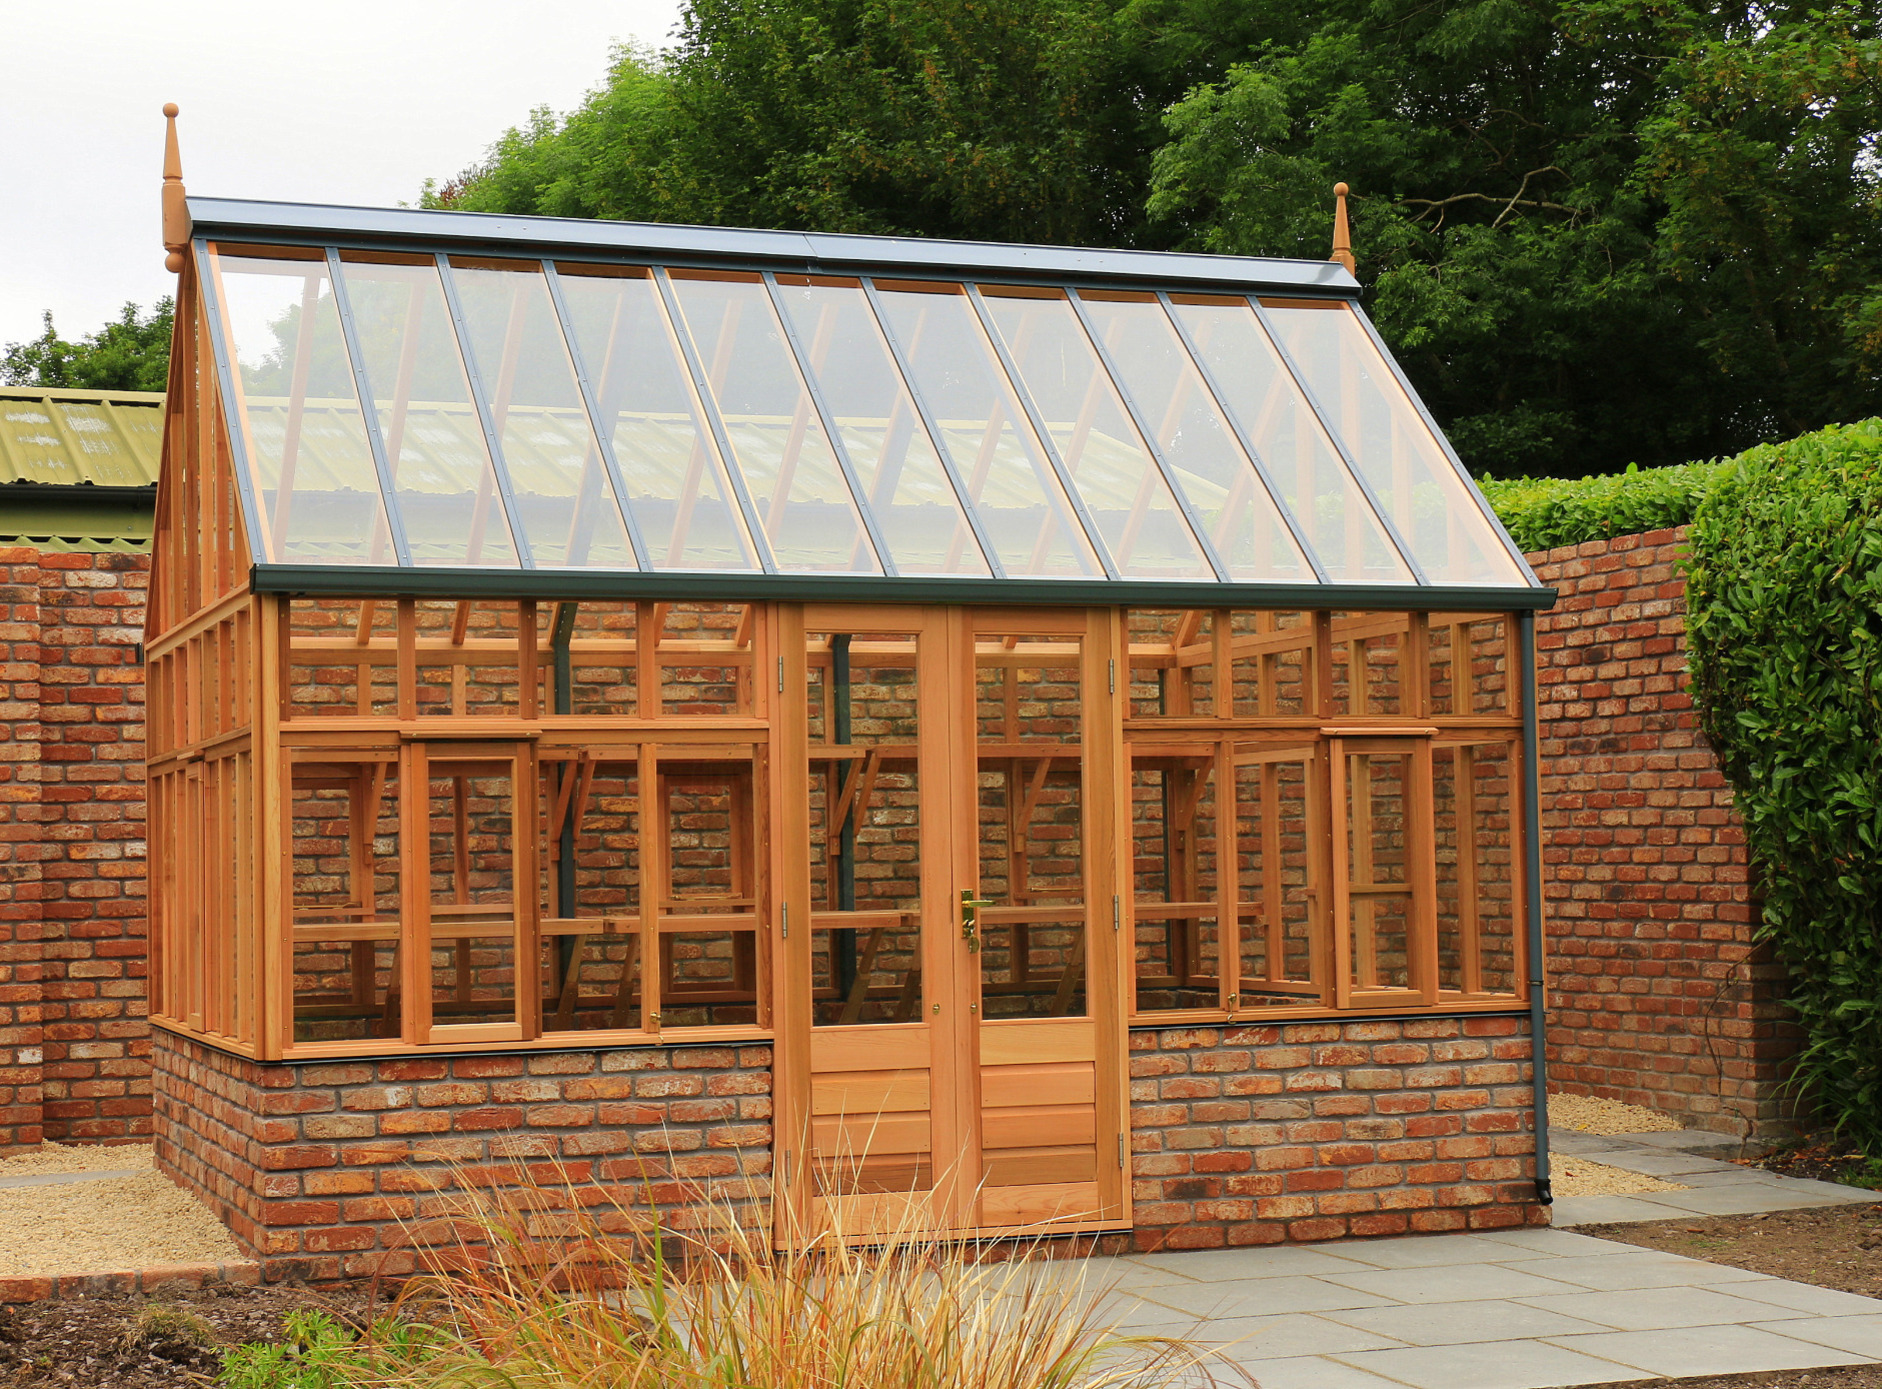 RHS Wisley Planthouse on dwarf wall - traditional Victorian timber Greenhouse